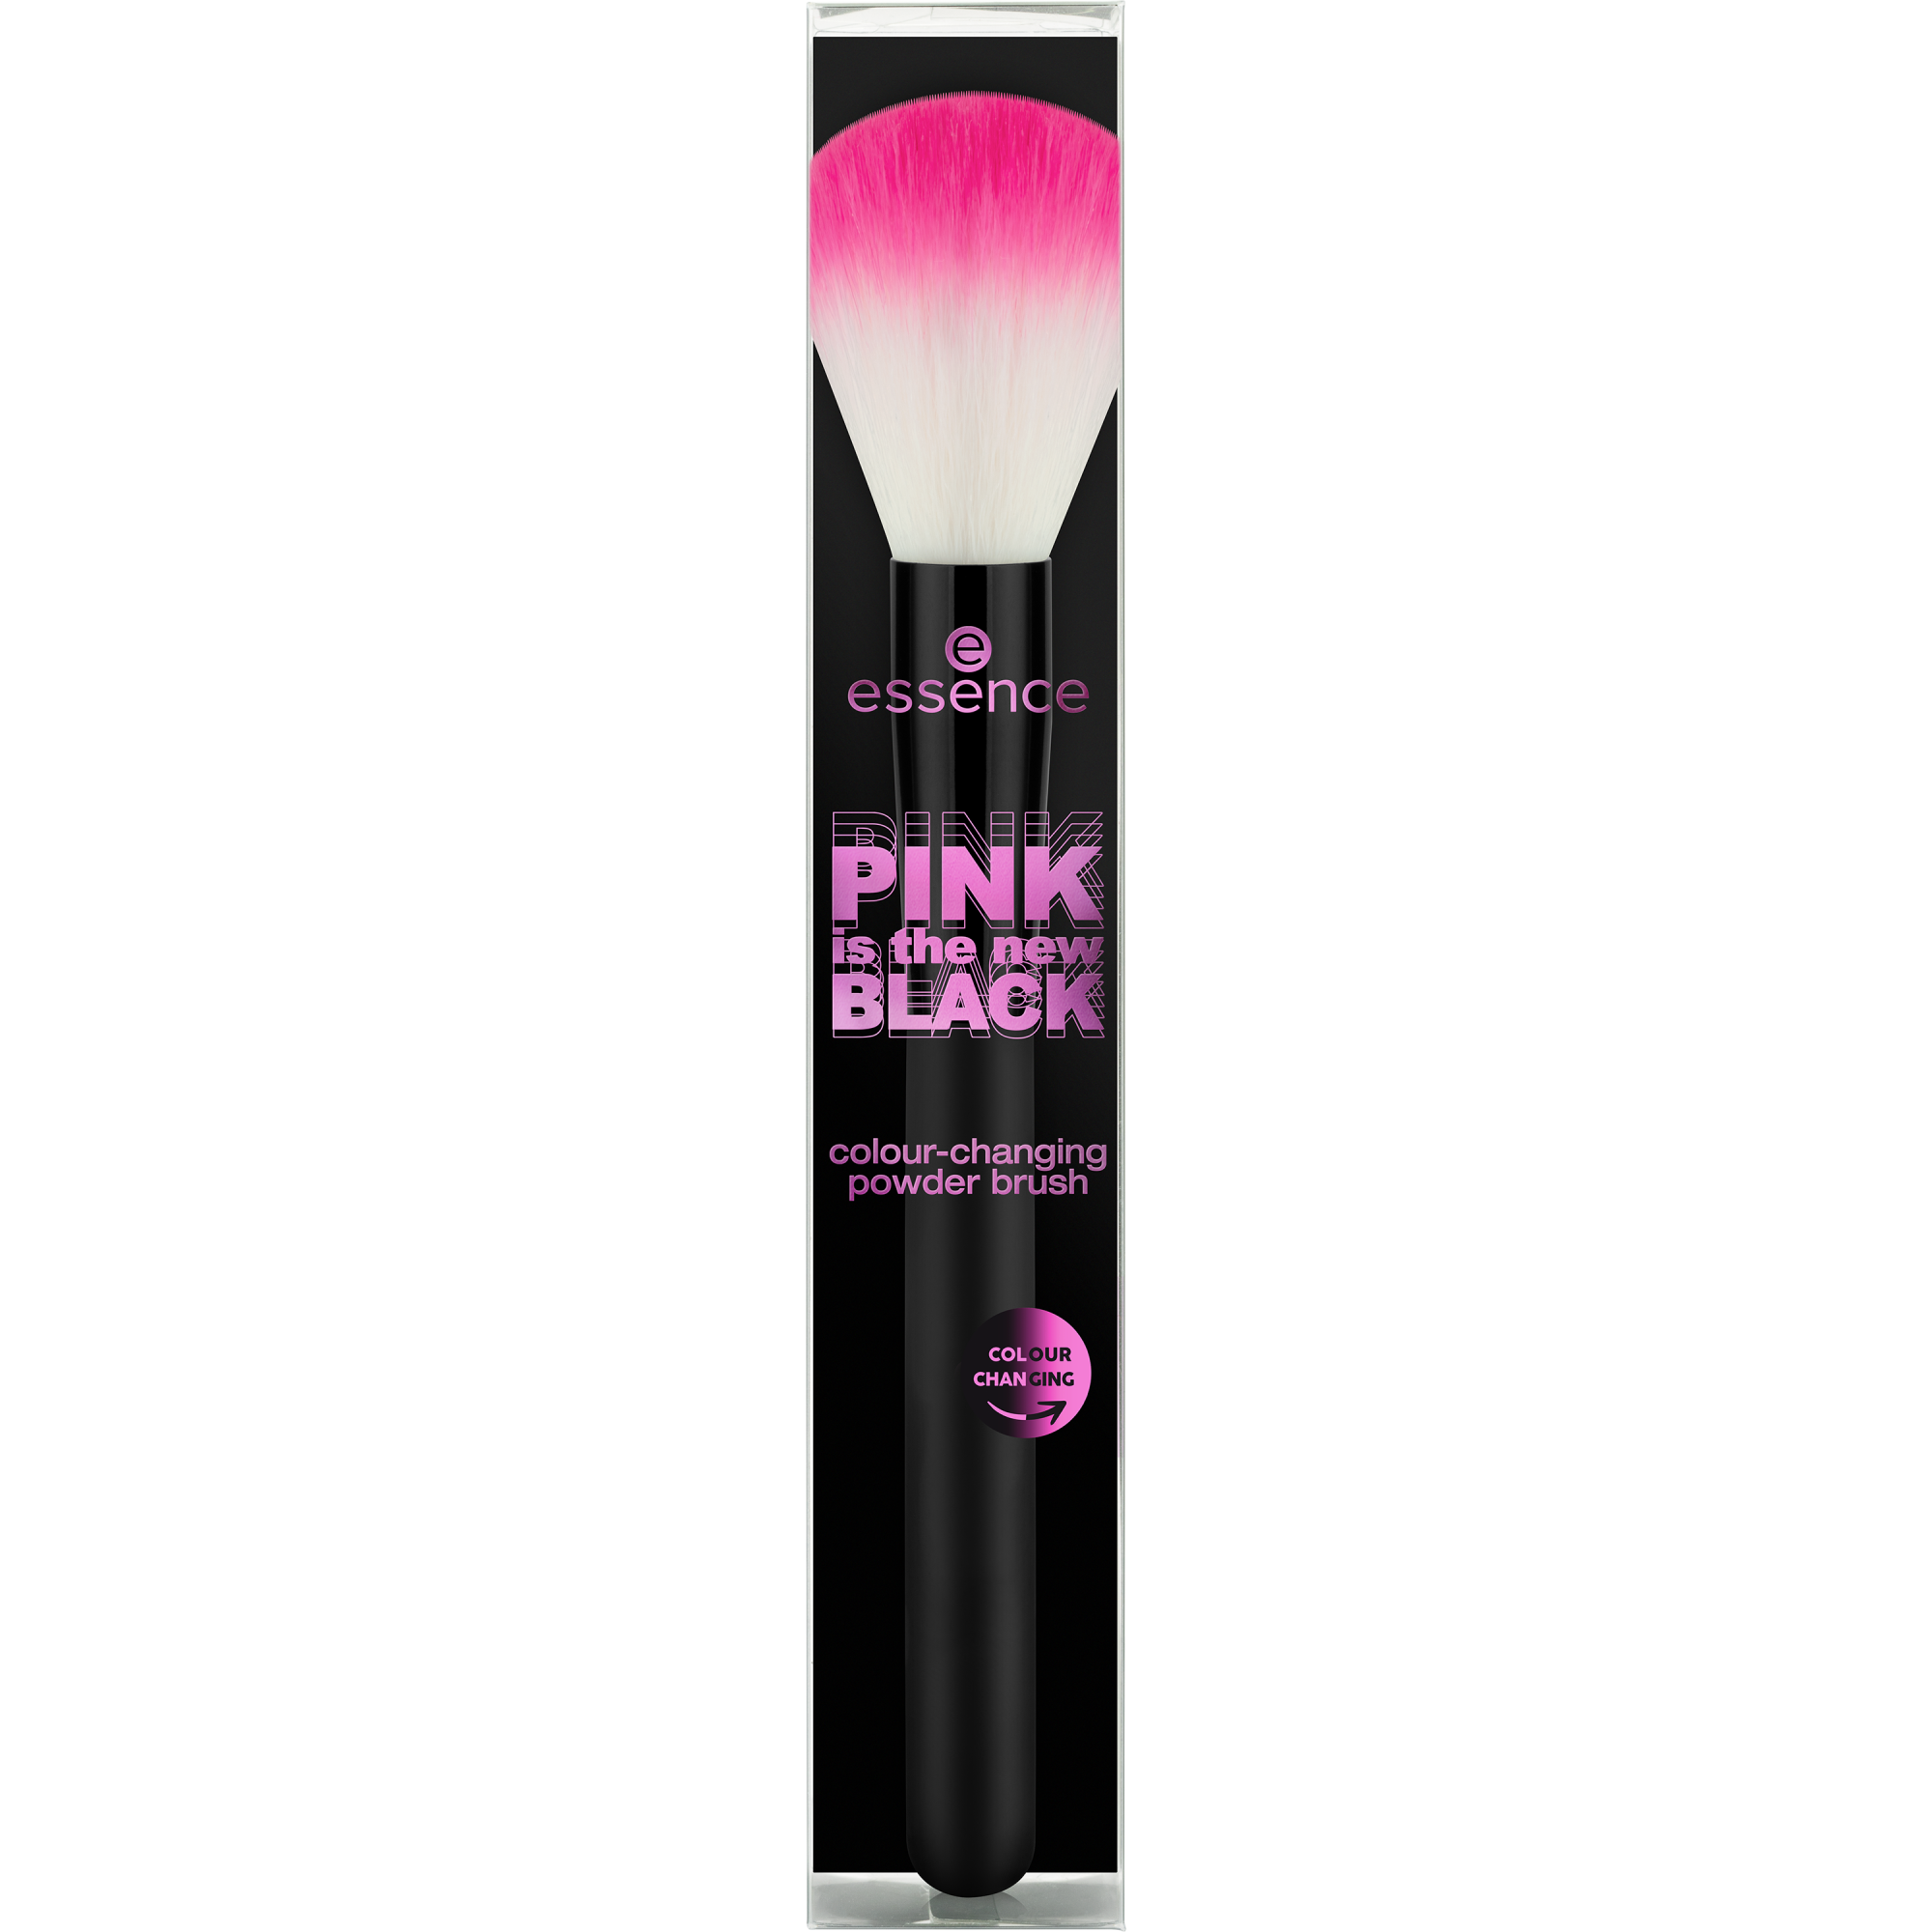 PINK is the new BLACK colour-changing powder brush